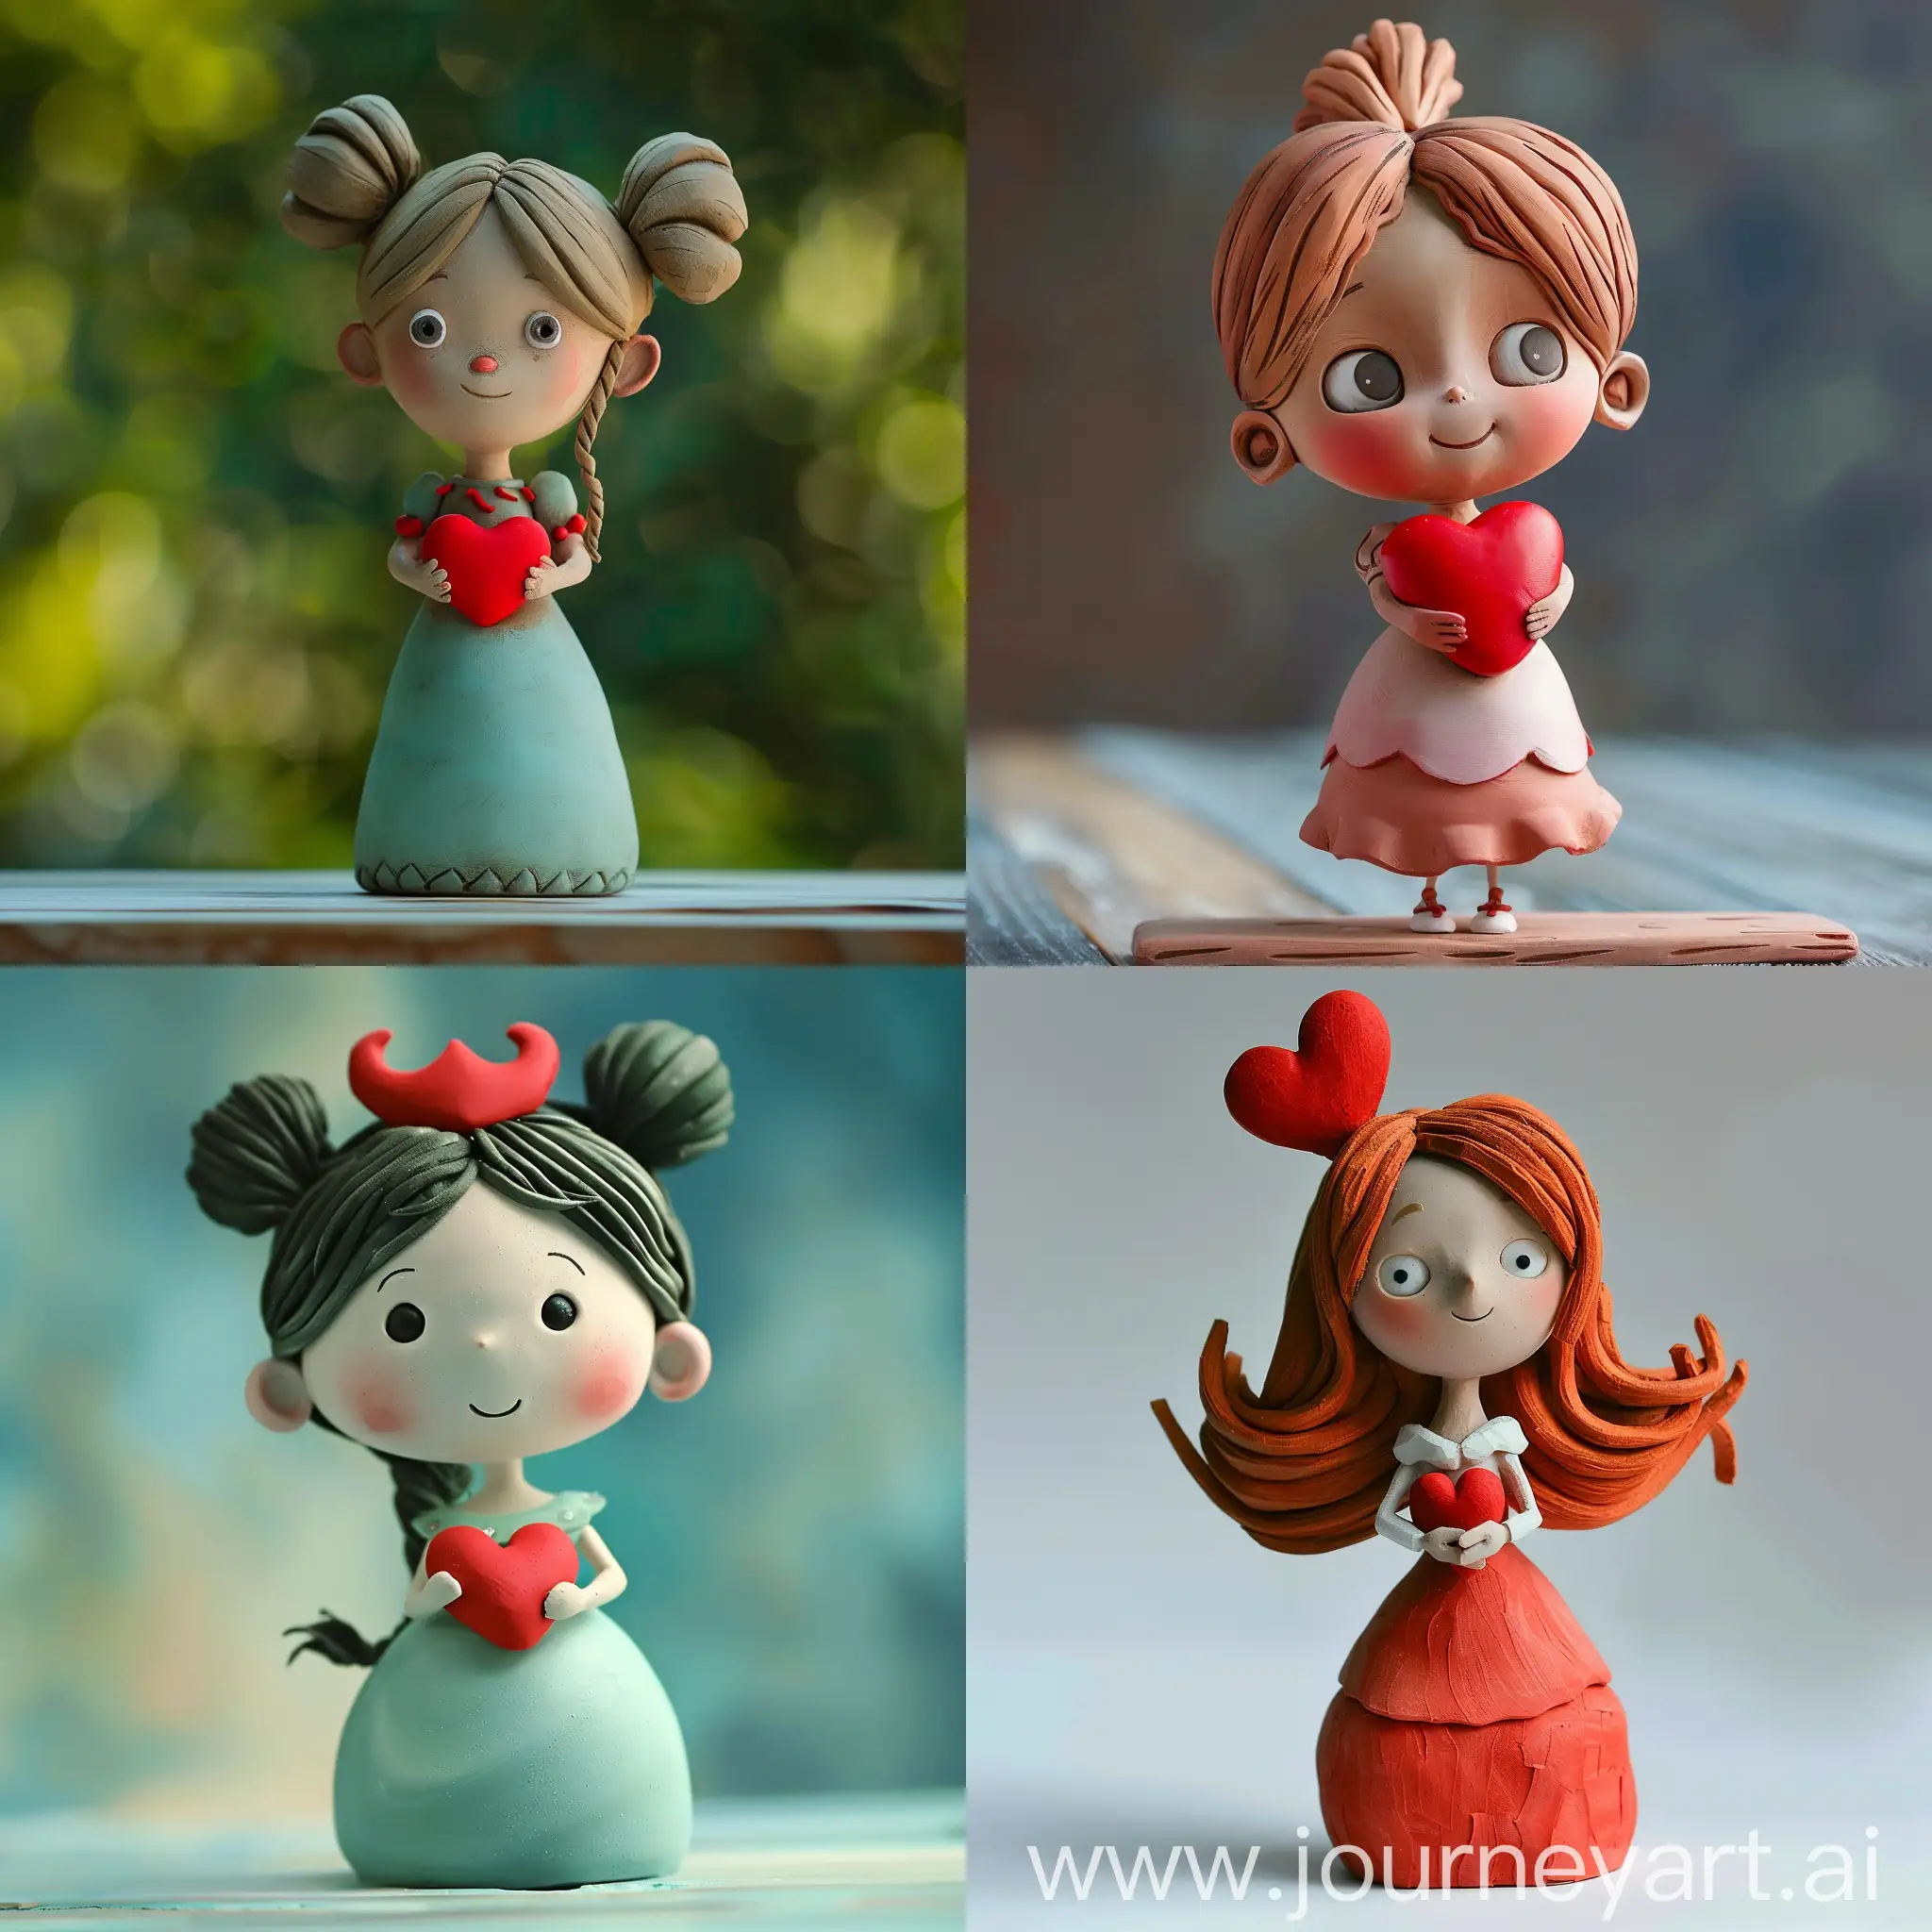 Little princess holding a red heart, claymation